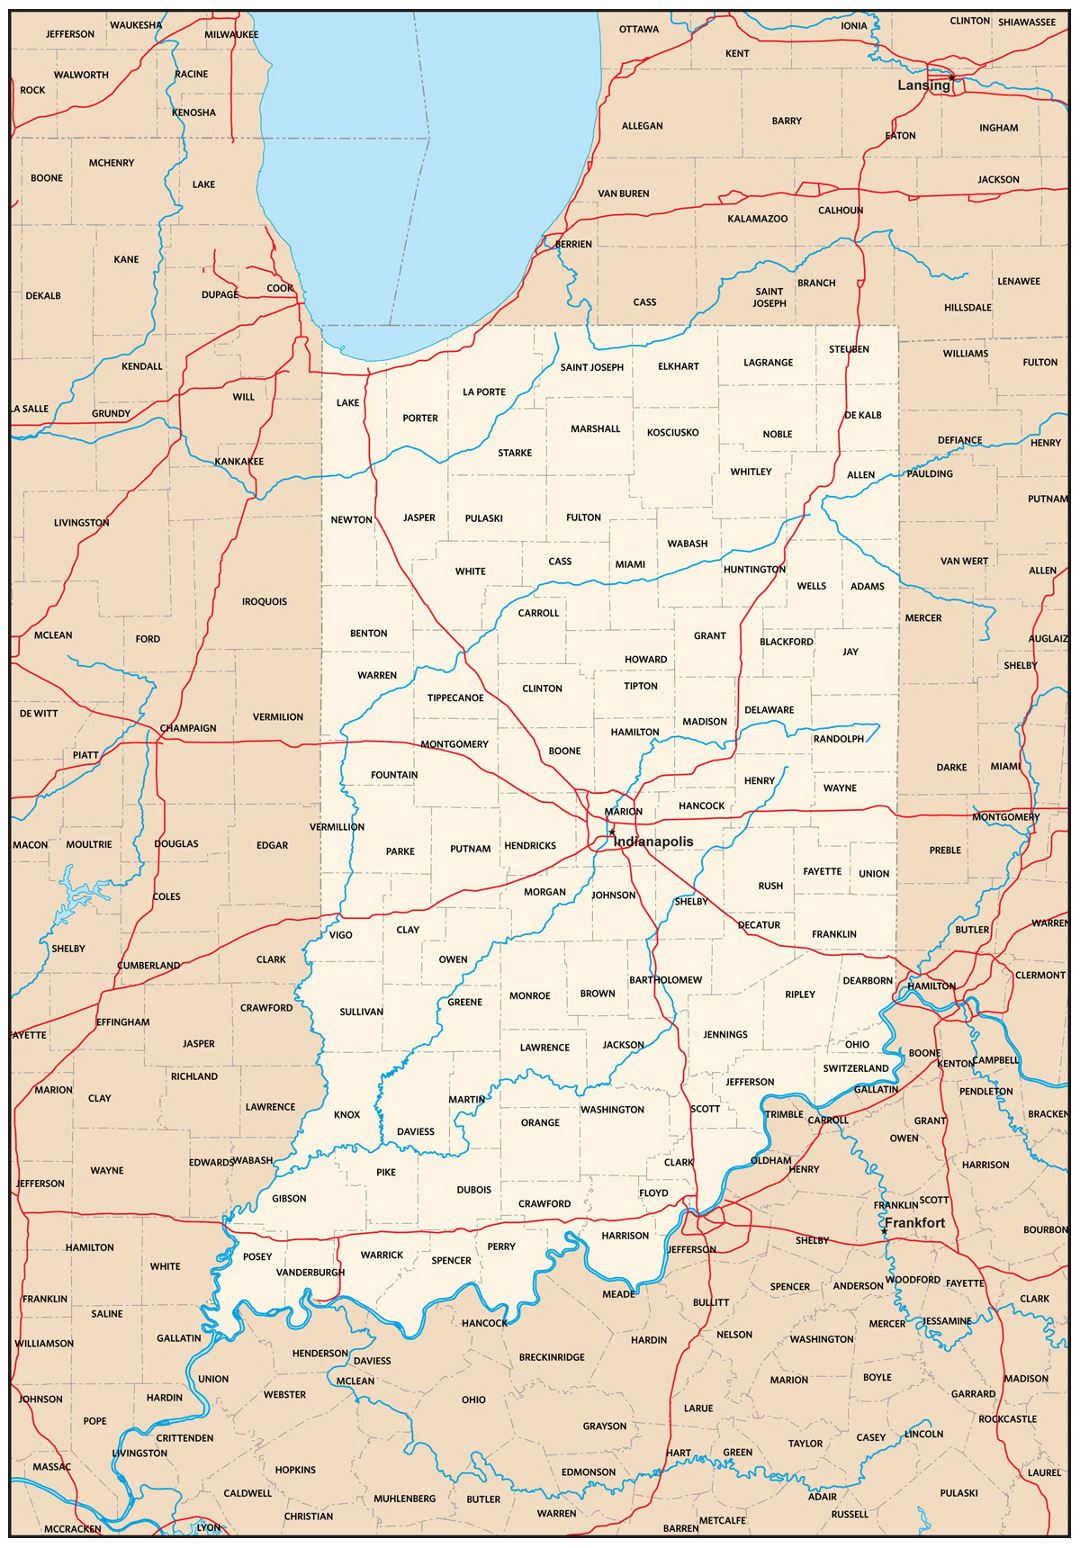 Detailed administrative map of Indiana